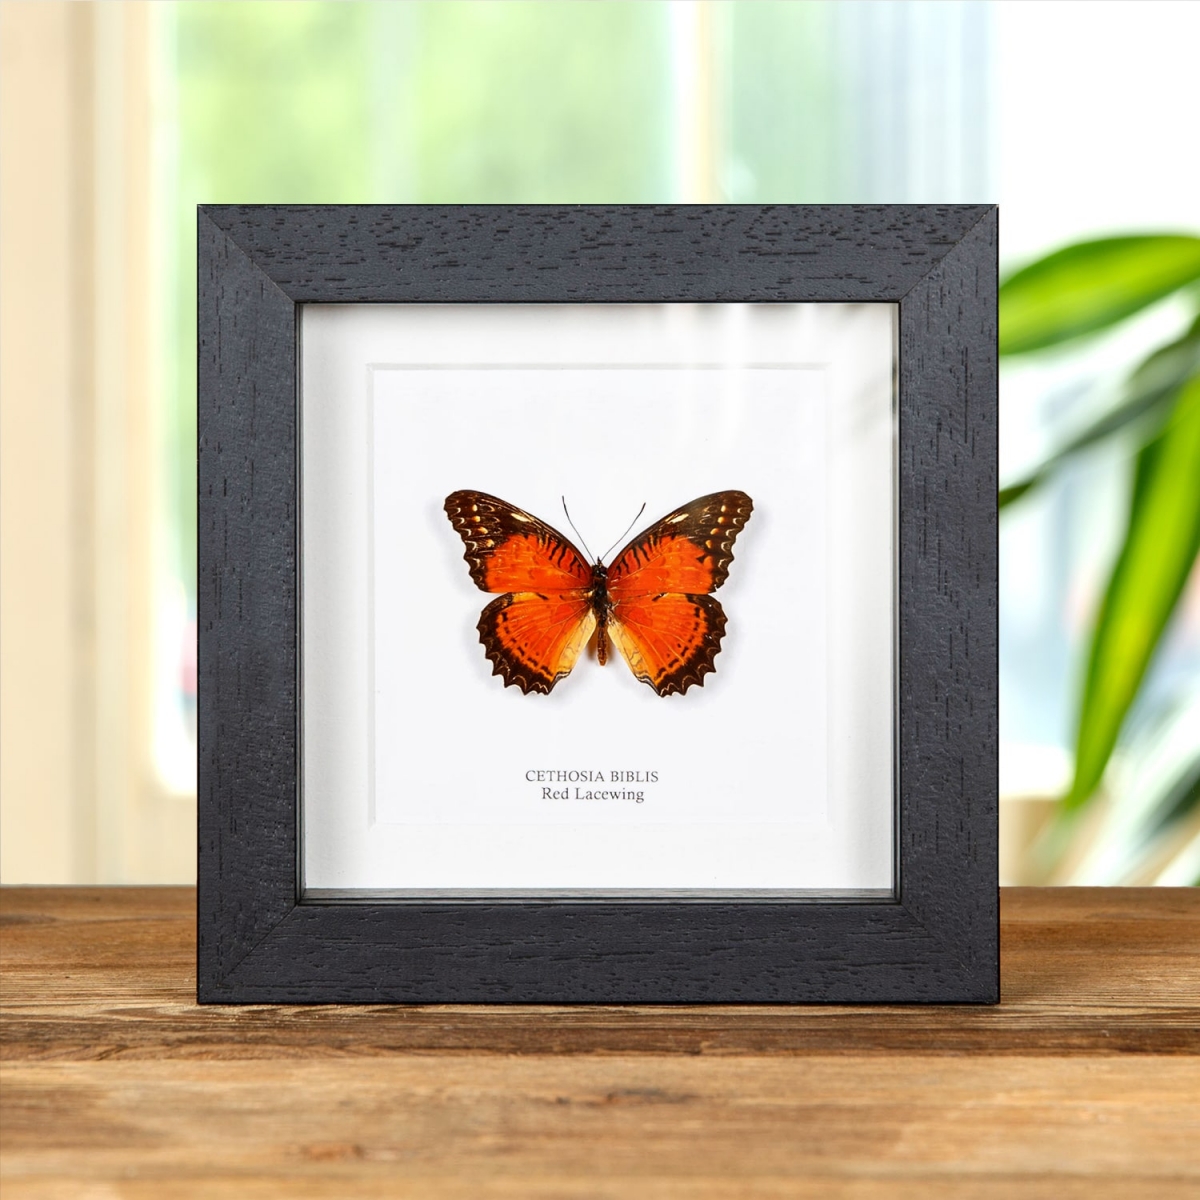 Cethosia biblis Red Lacewing Butterfly in Box Frame insect taxidermy 